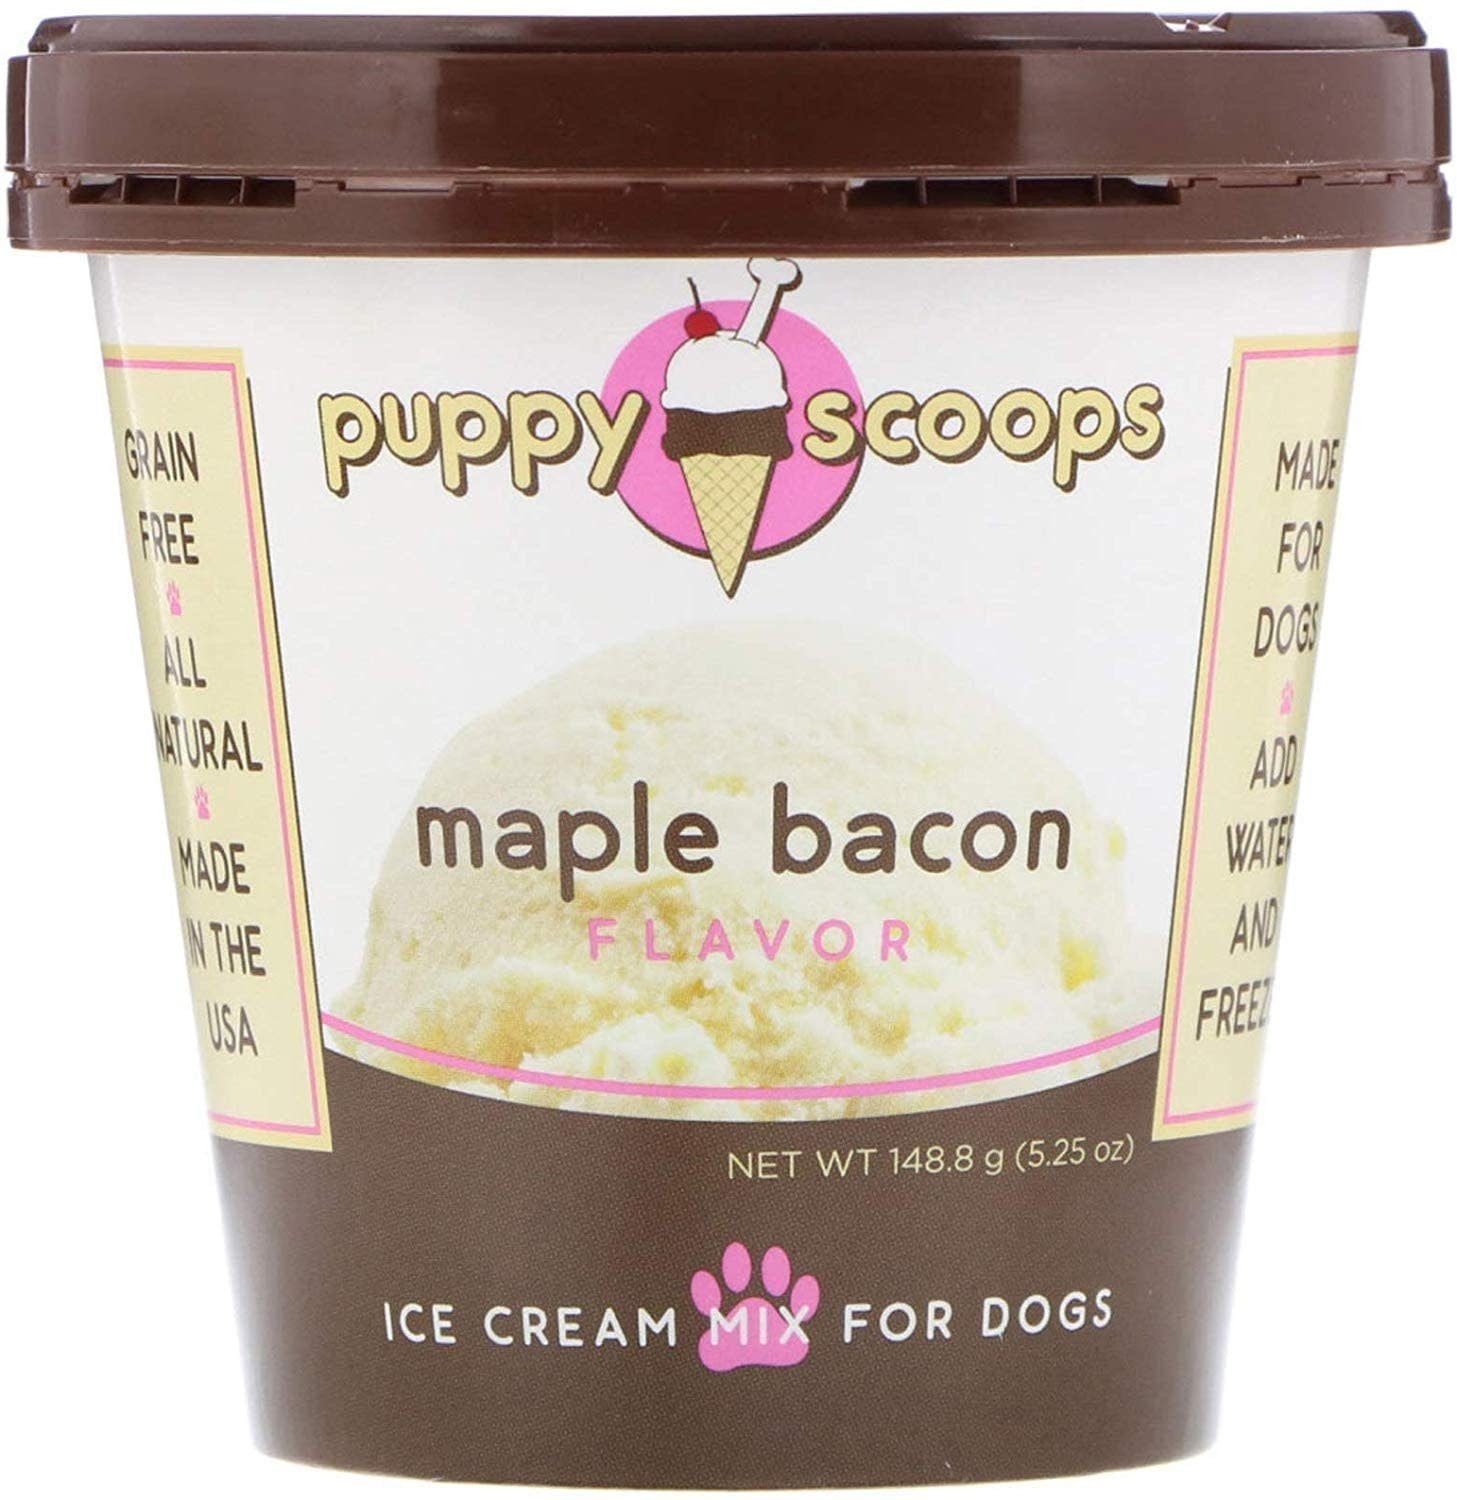 What cupcake filling would pair well with this Maple buttercream frosting  and Bacon flavored cupcake? : r/Baking